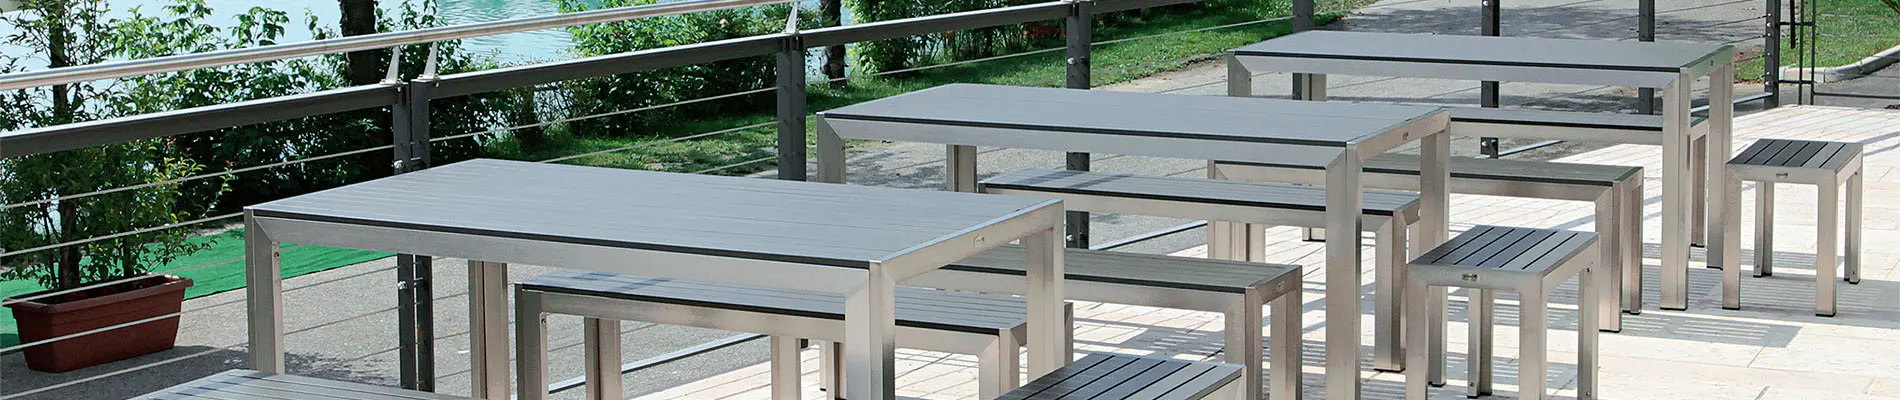 Tables and coffee tables for outdoor use